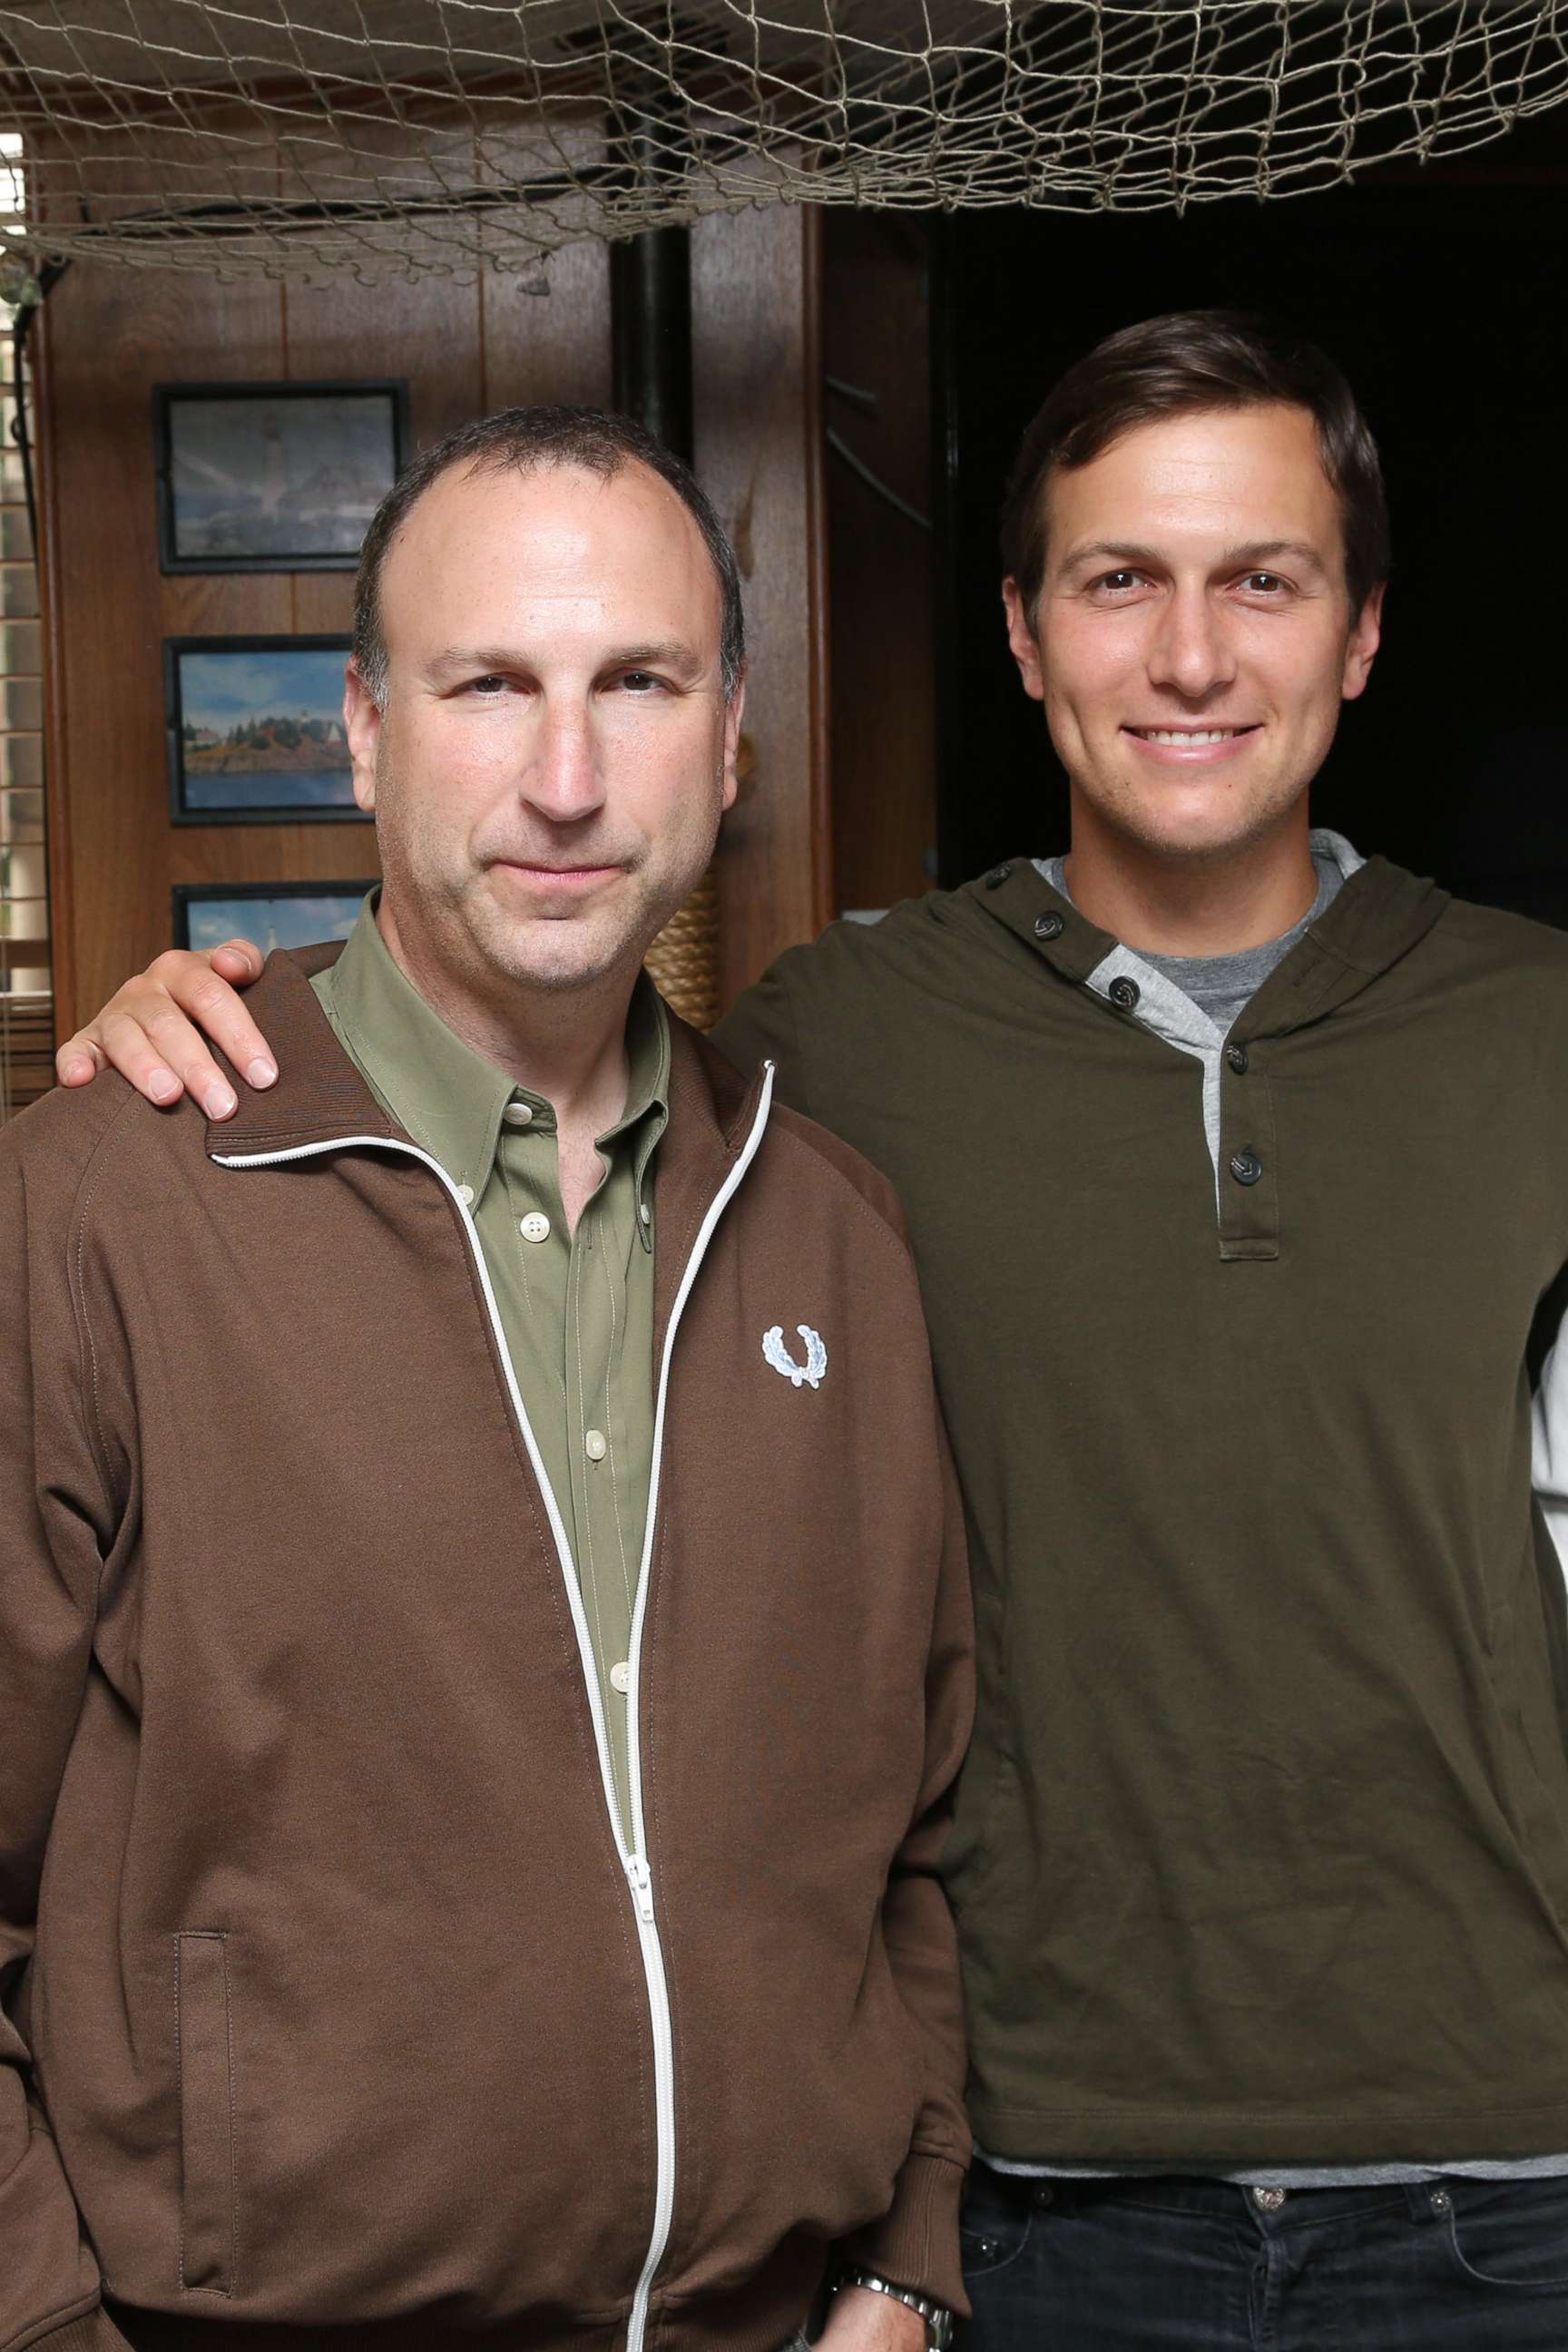 PHOTO: Ken Kurson and Jared Kushner attend The New York Observer Celebrates Robert Kurson's New Book PIRATE HUNTERS at The Rusty Knot, June 15, 2015, in New York.